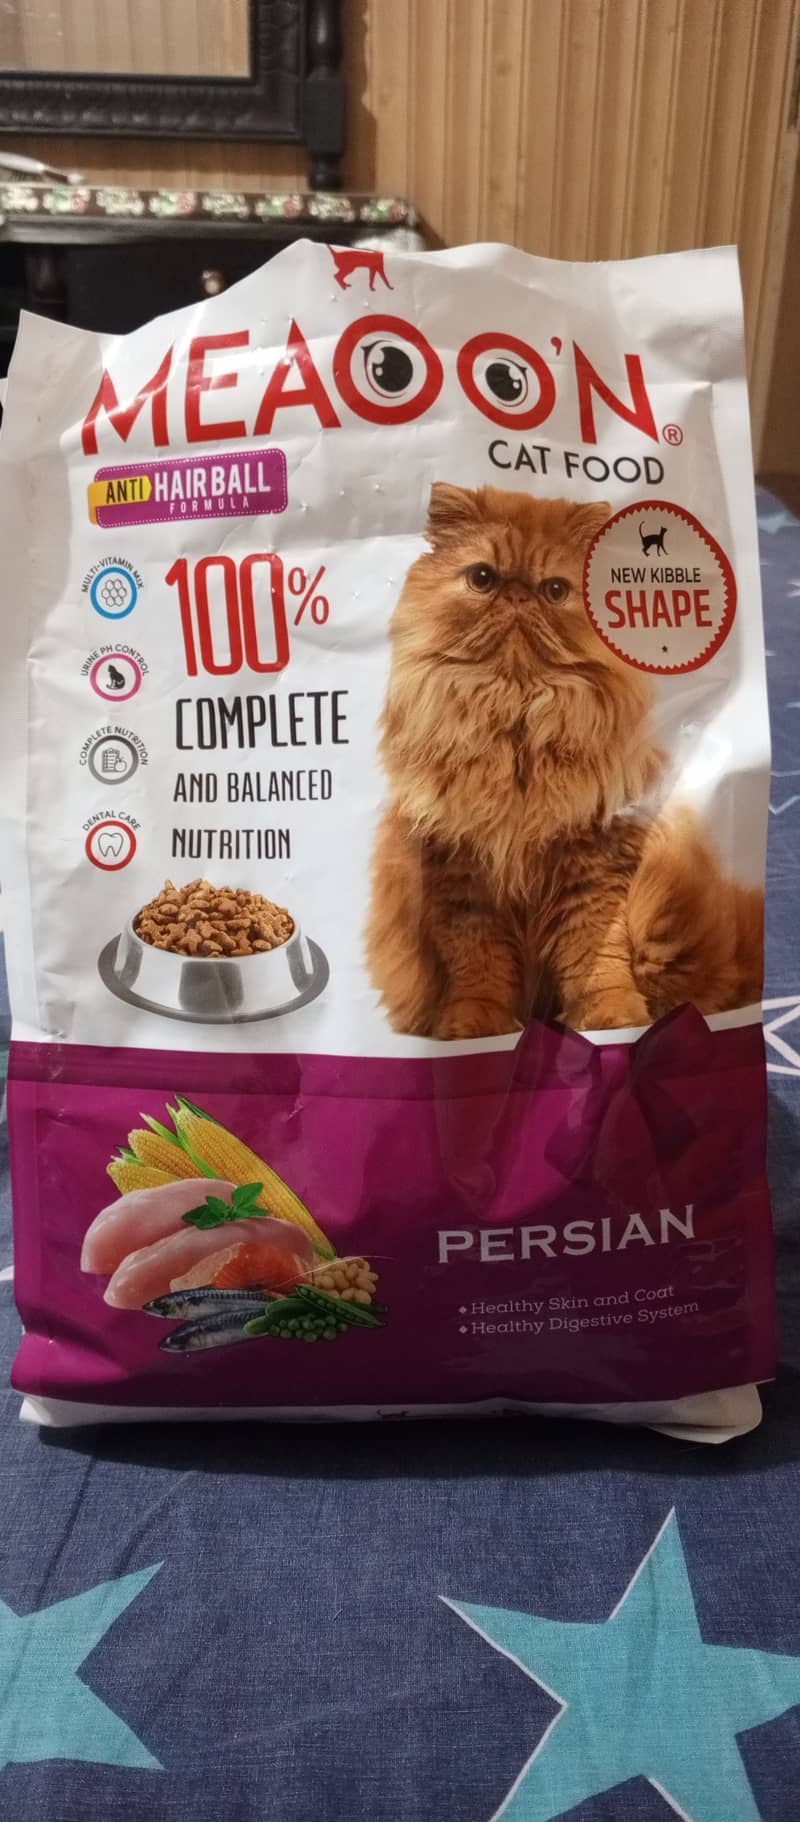 MEAOON CAT FOOD. 3